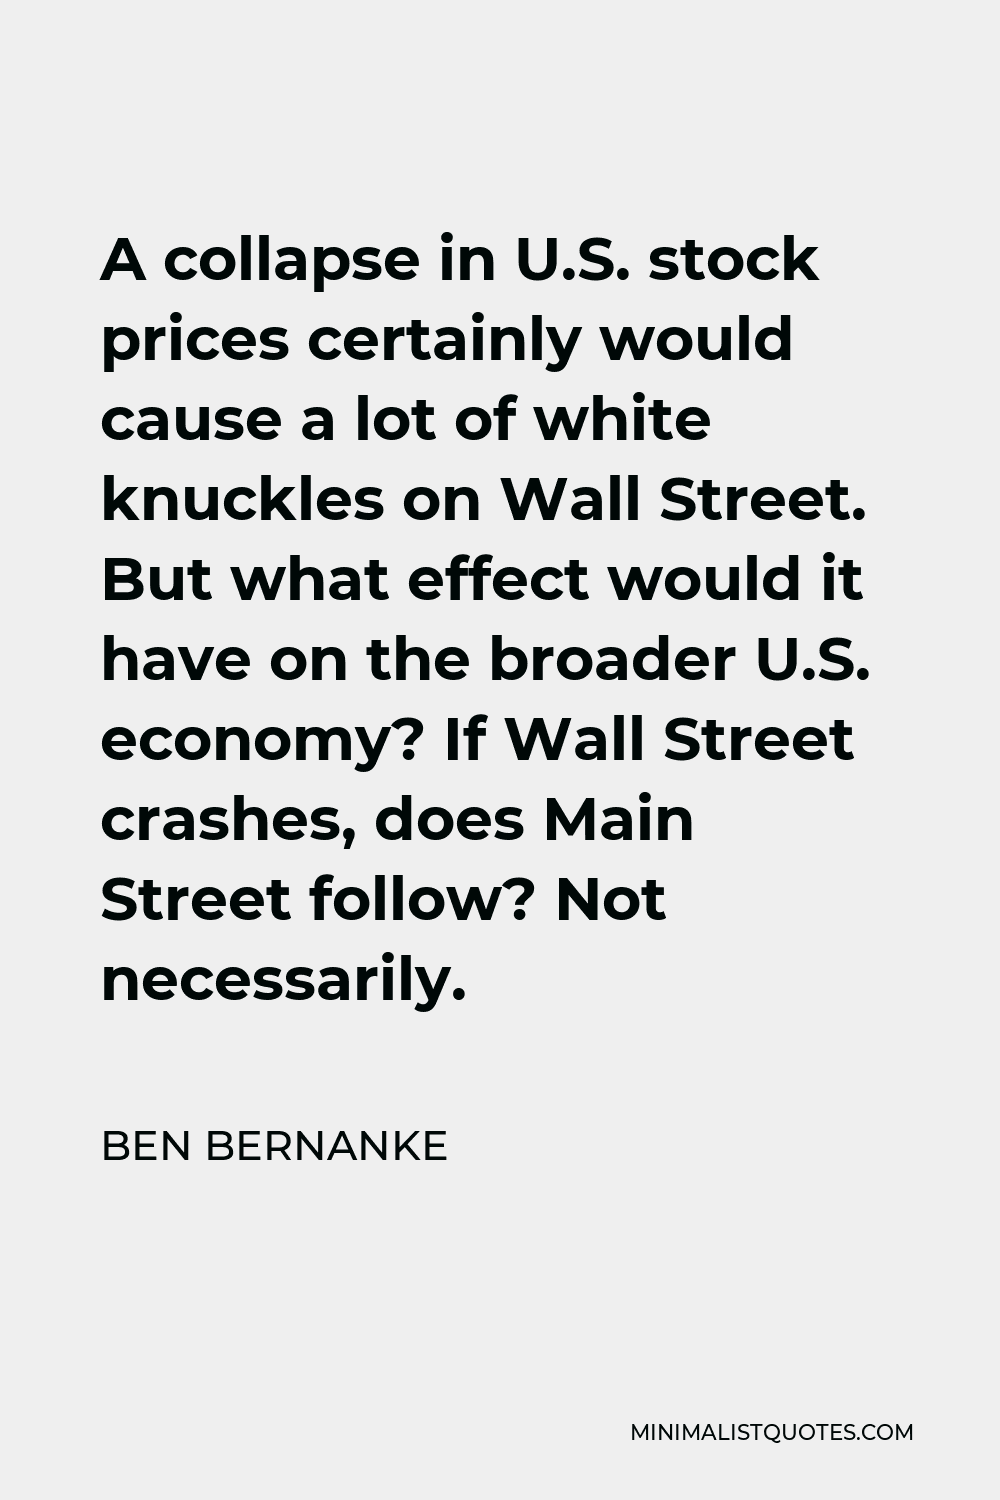 Ben Bernanke Quote - A collapse in U.S. stock prices certainly would cause a lot of white knuckles on Wall Street. But what effect would it have on the broader U.S. economy? If Wall Street crashes, does Main Street follow? Not necessarily.